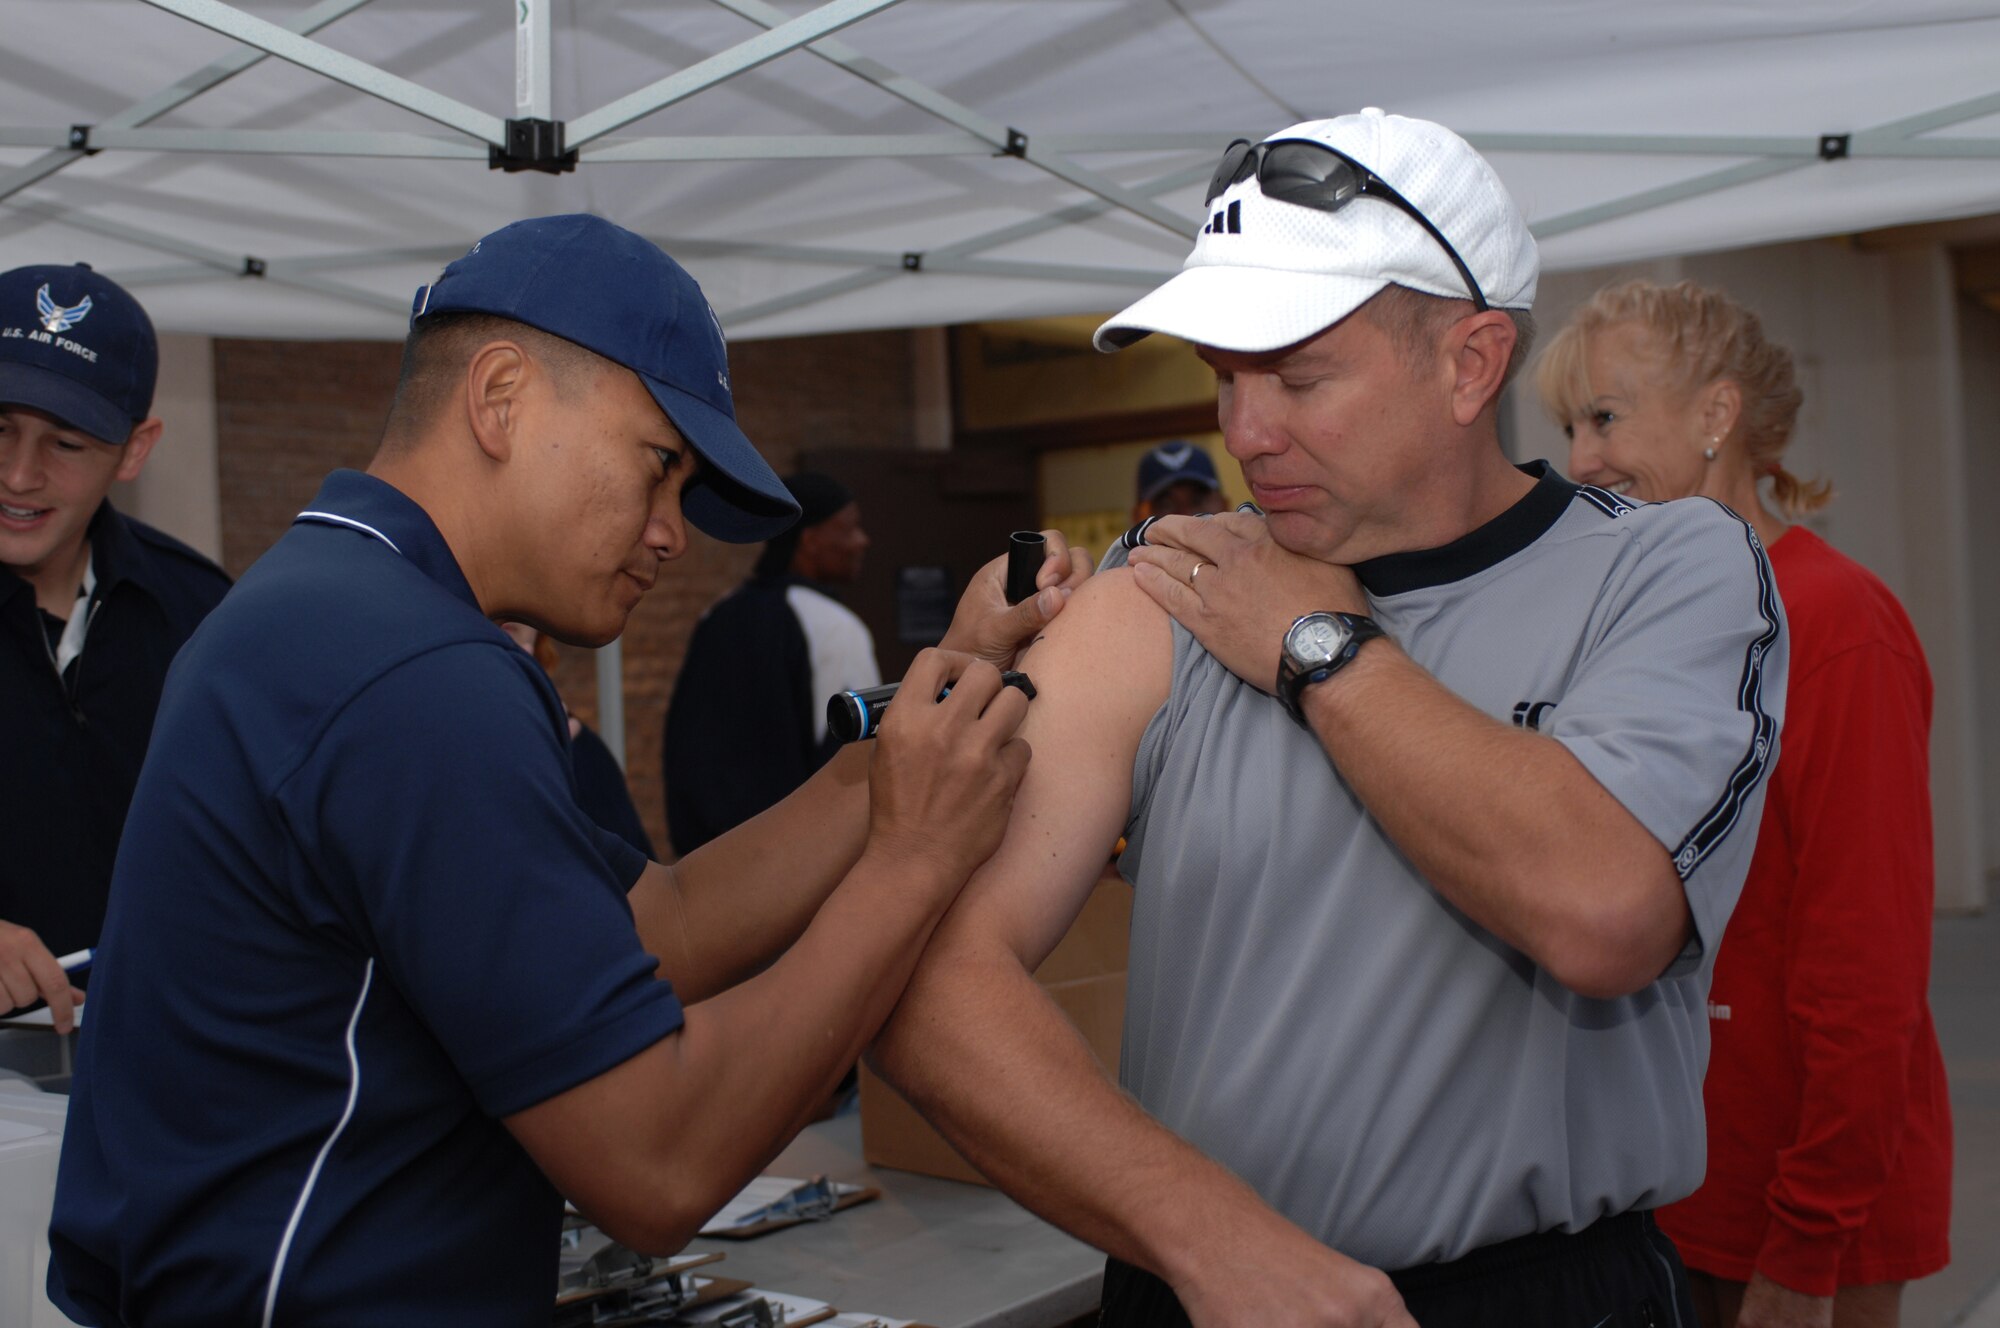 Master Sgt. Reynaldo Bautista, 49th Force Support Squadron, writes Lt. Col. Keith Vraa?s race number on his arm before the Triathlon at Holloman Air Force Base, N.M., October 12. The annual Triathlon was open to everyone who signed up and more than 60 athletes participated. (U.S. Air Force photo/Airman Sondra M. Escutia)